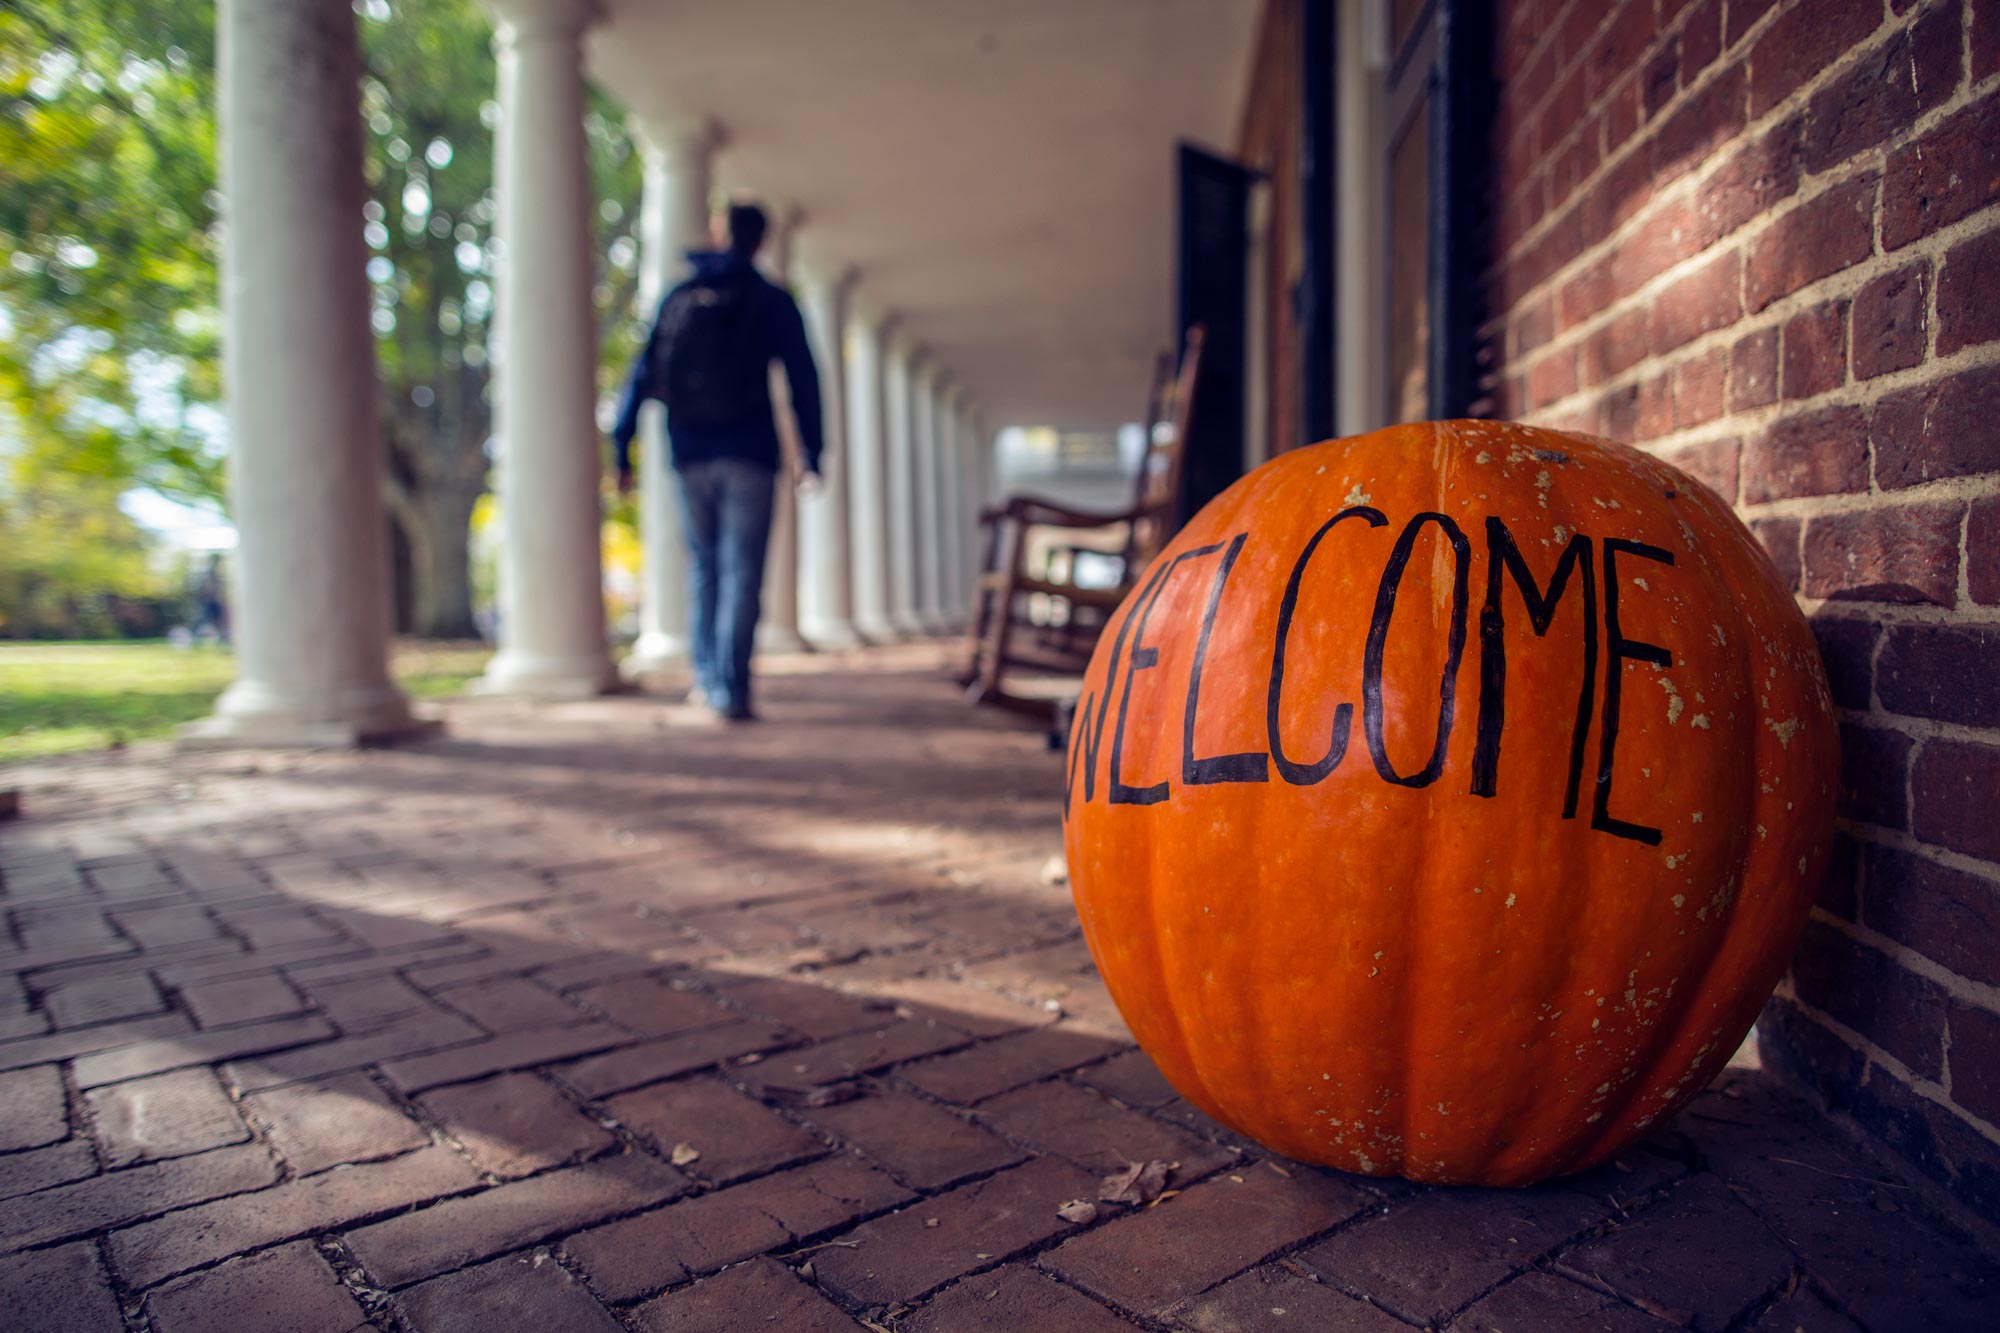 Pumpkin that says Welcome on it